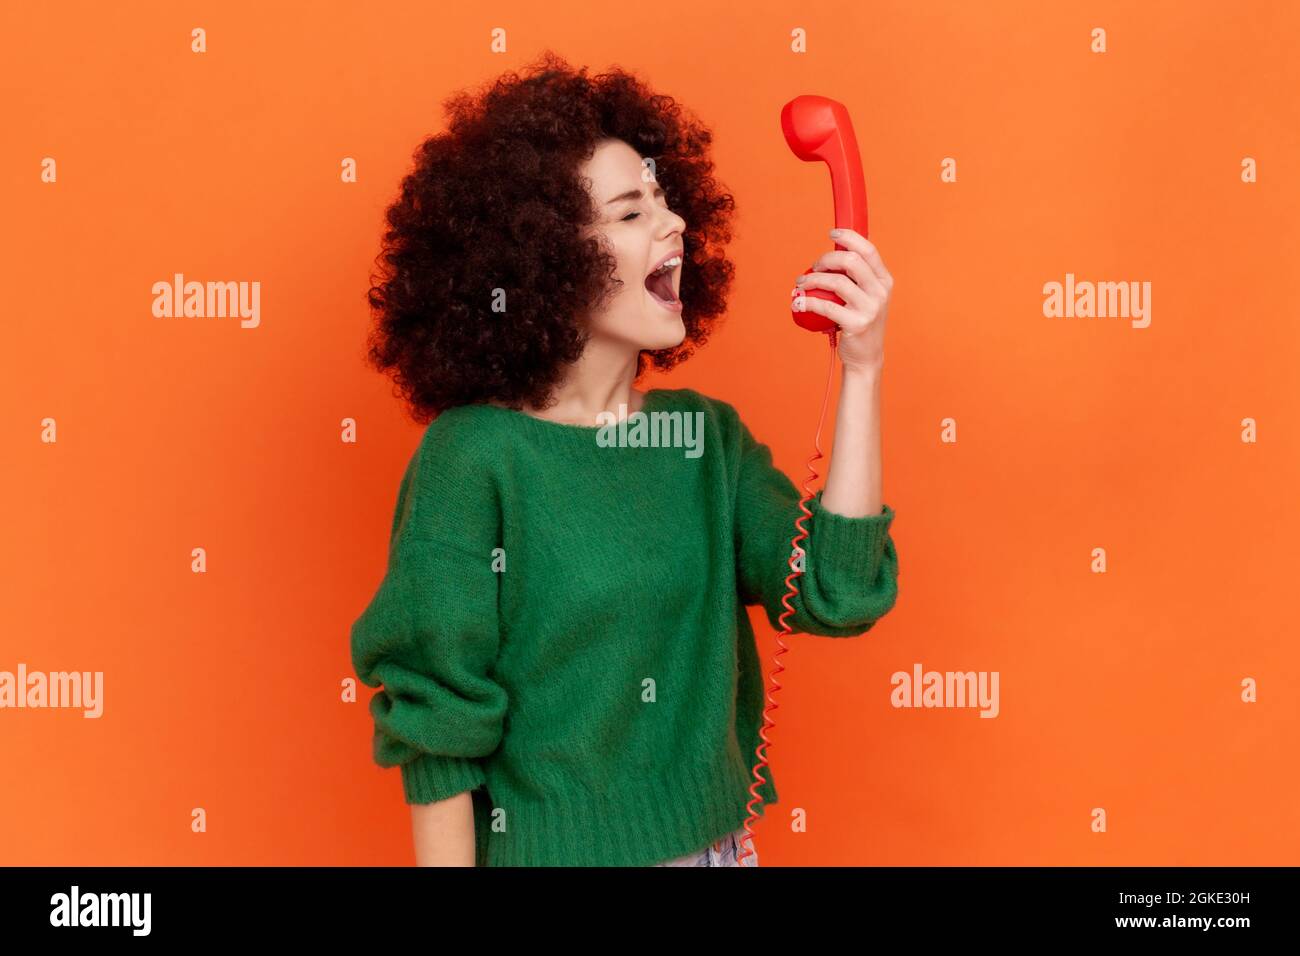 Side view of angry woman with Afro hairstyle wearing green casual style sweater screaming while talking to client in call center, negative emotions. I Stock Photo